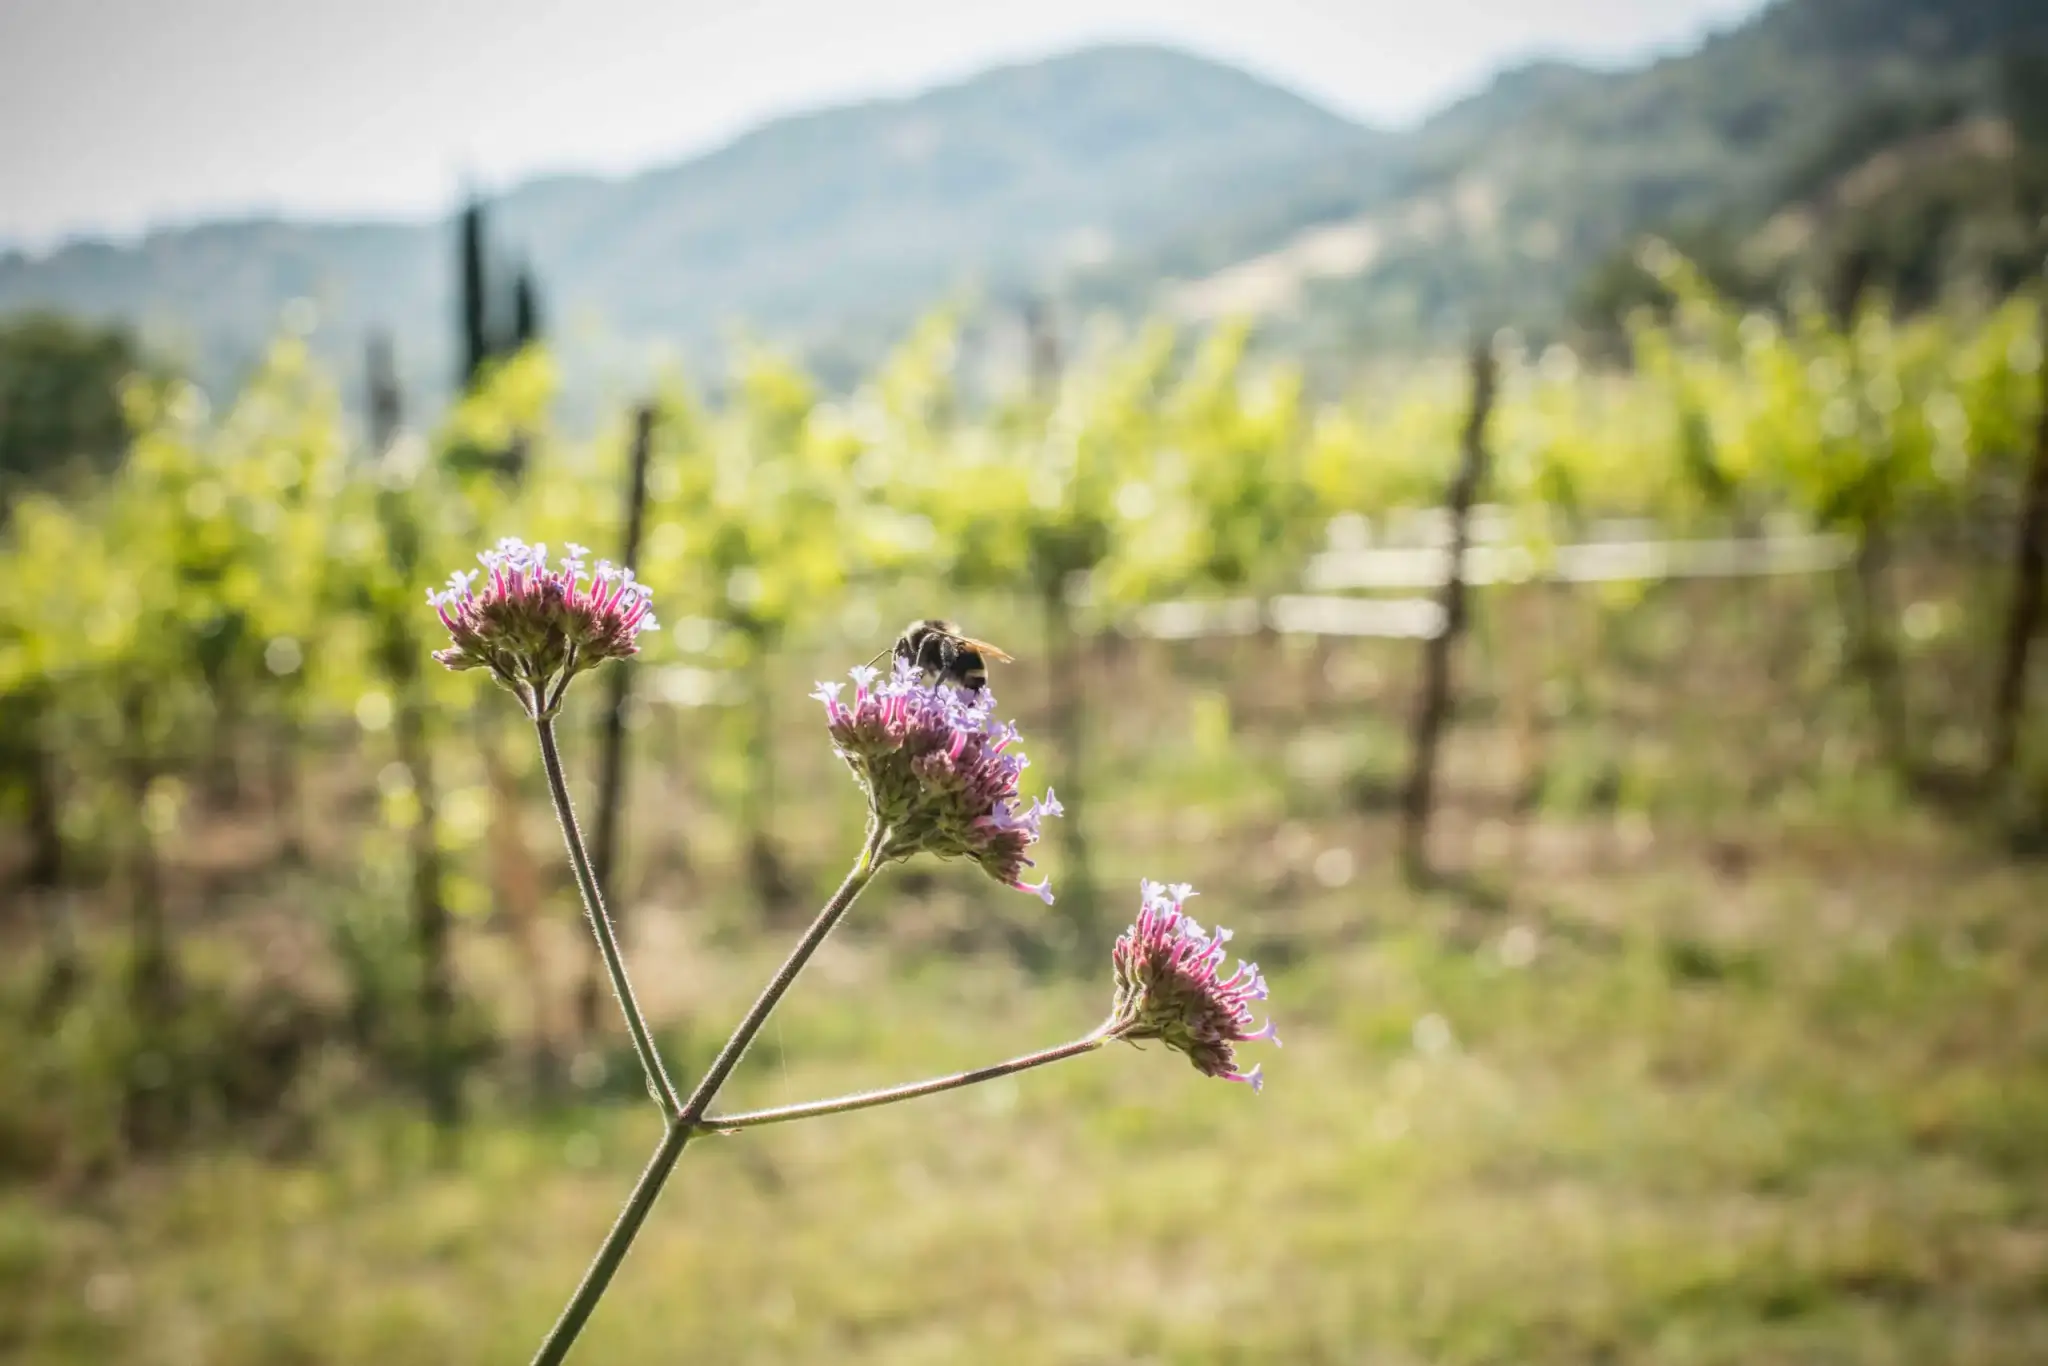 Selected focus, bee on a flower with a vineyard background